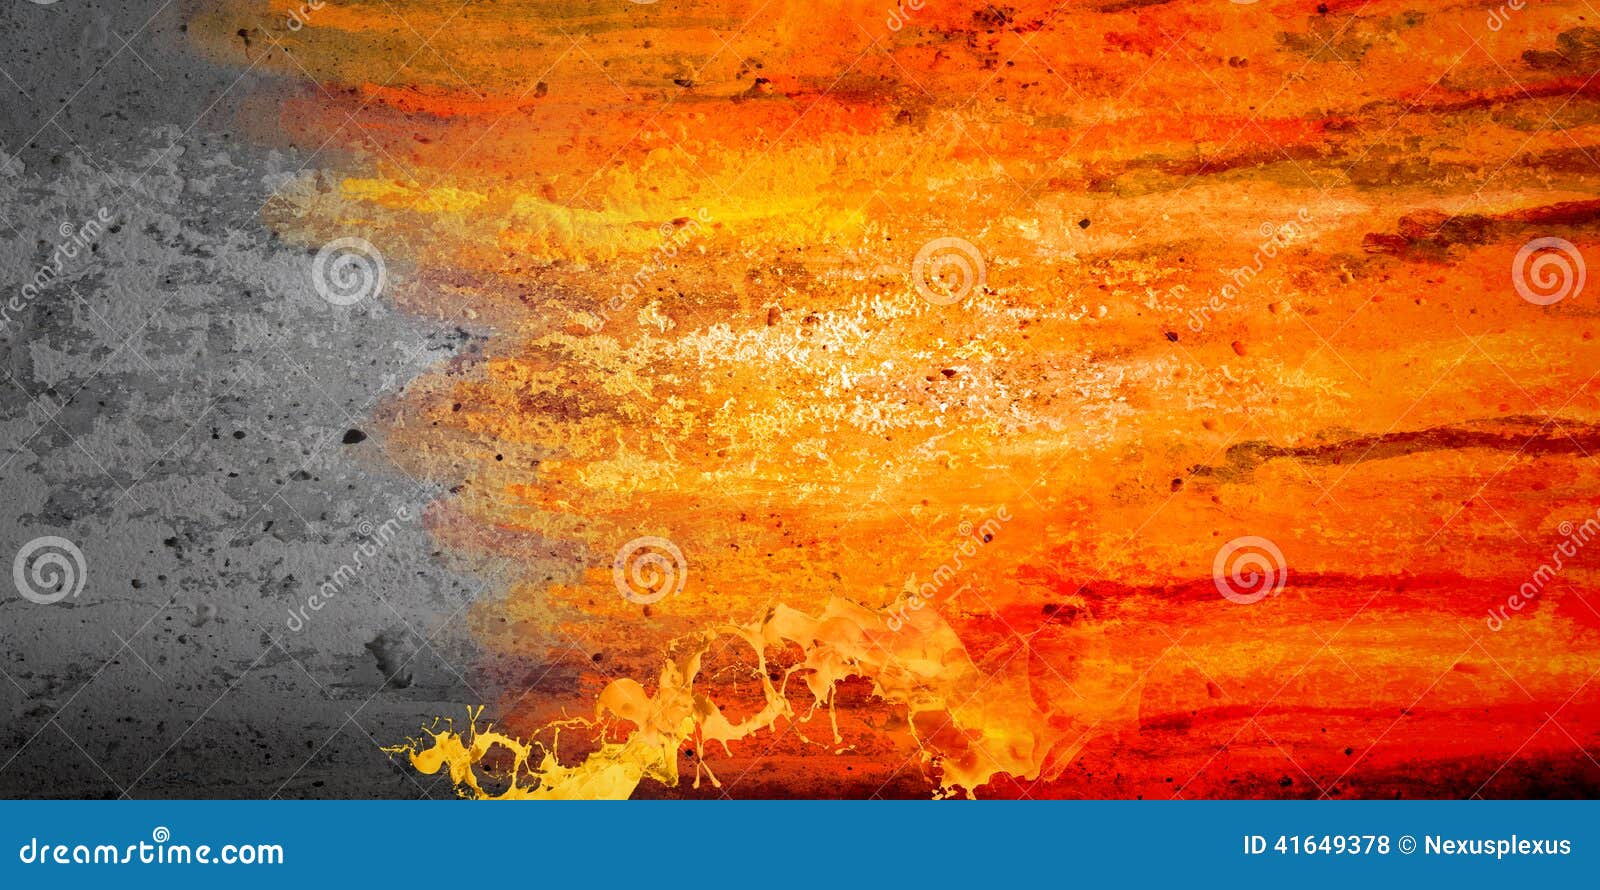 Painting background stock photo. Image of copy, abstract - 41649378